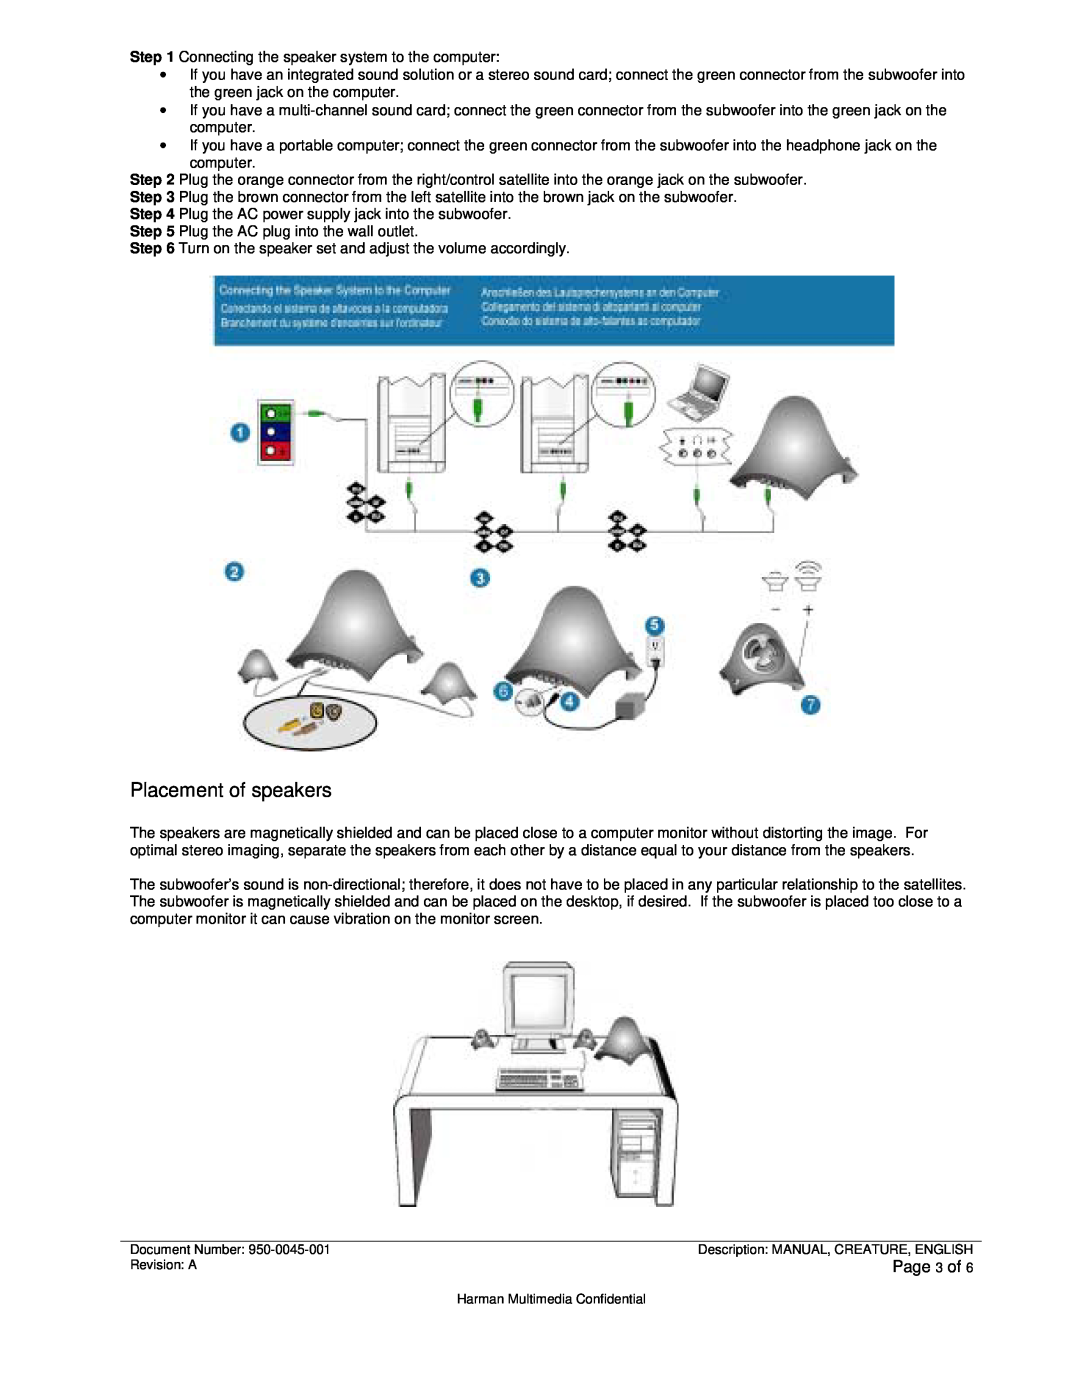 JBL CREATURE SELF POWERED SATELLITE SPEAKERS AND SUBWOOFER manual Placement of speakers, Page 3 of 